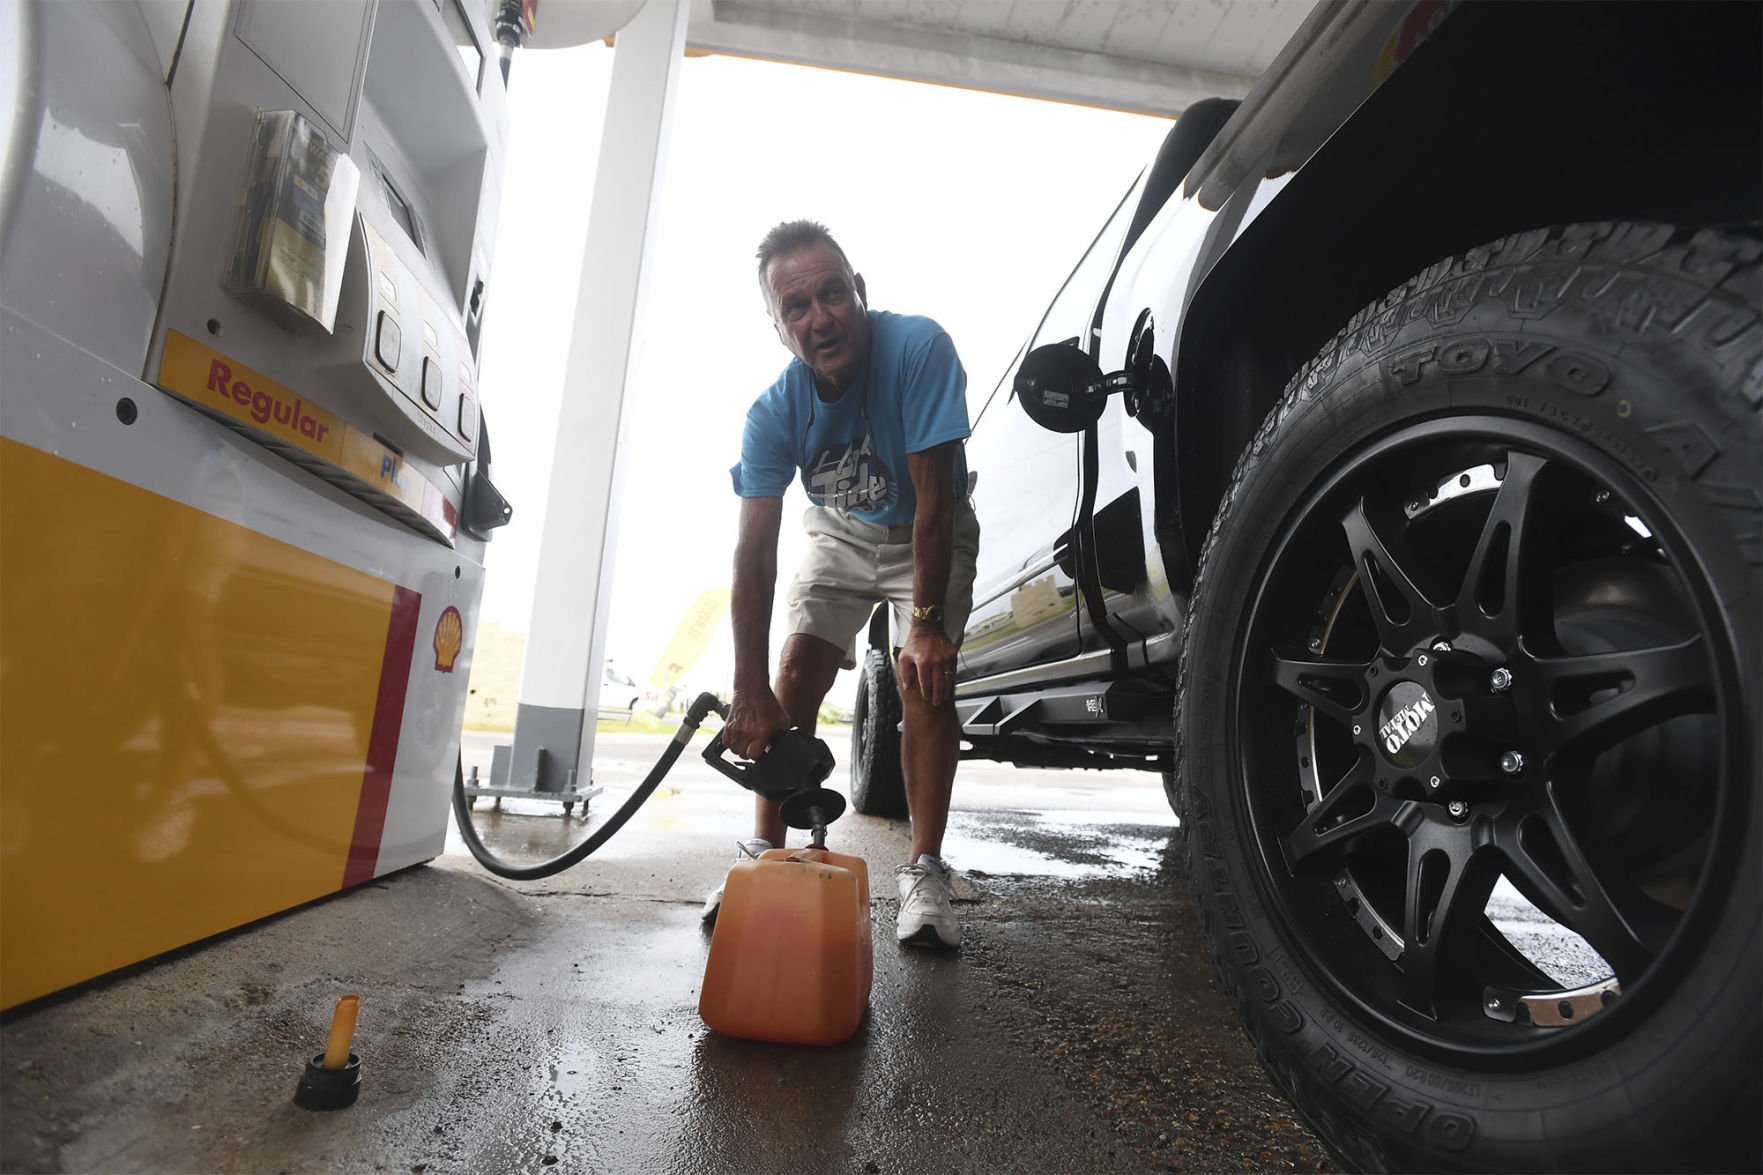 Hurricane May Cause Slight Rise In Gas Prices, Analyst Says